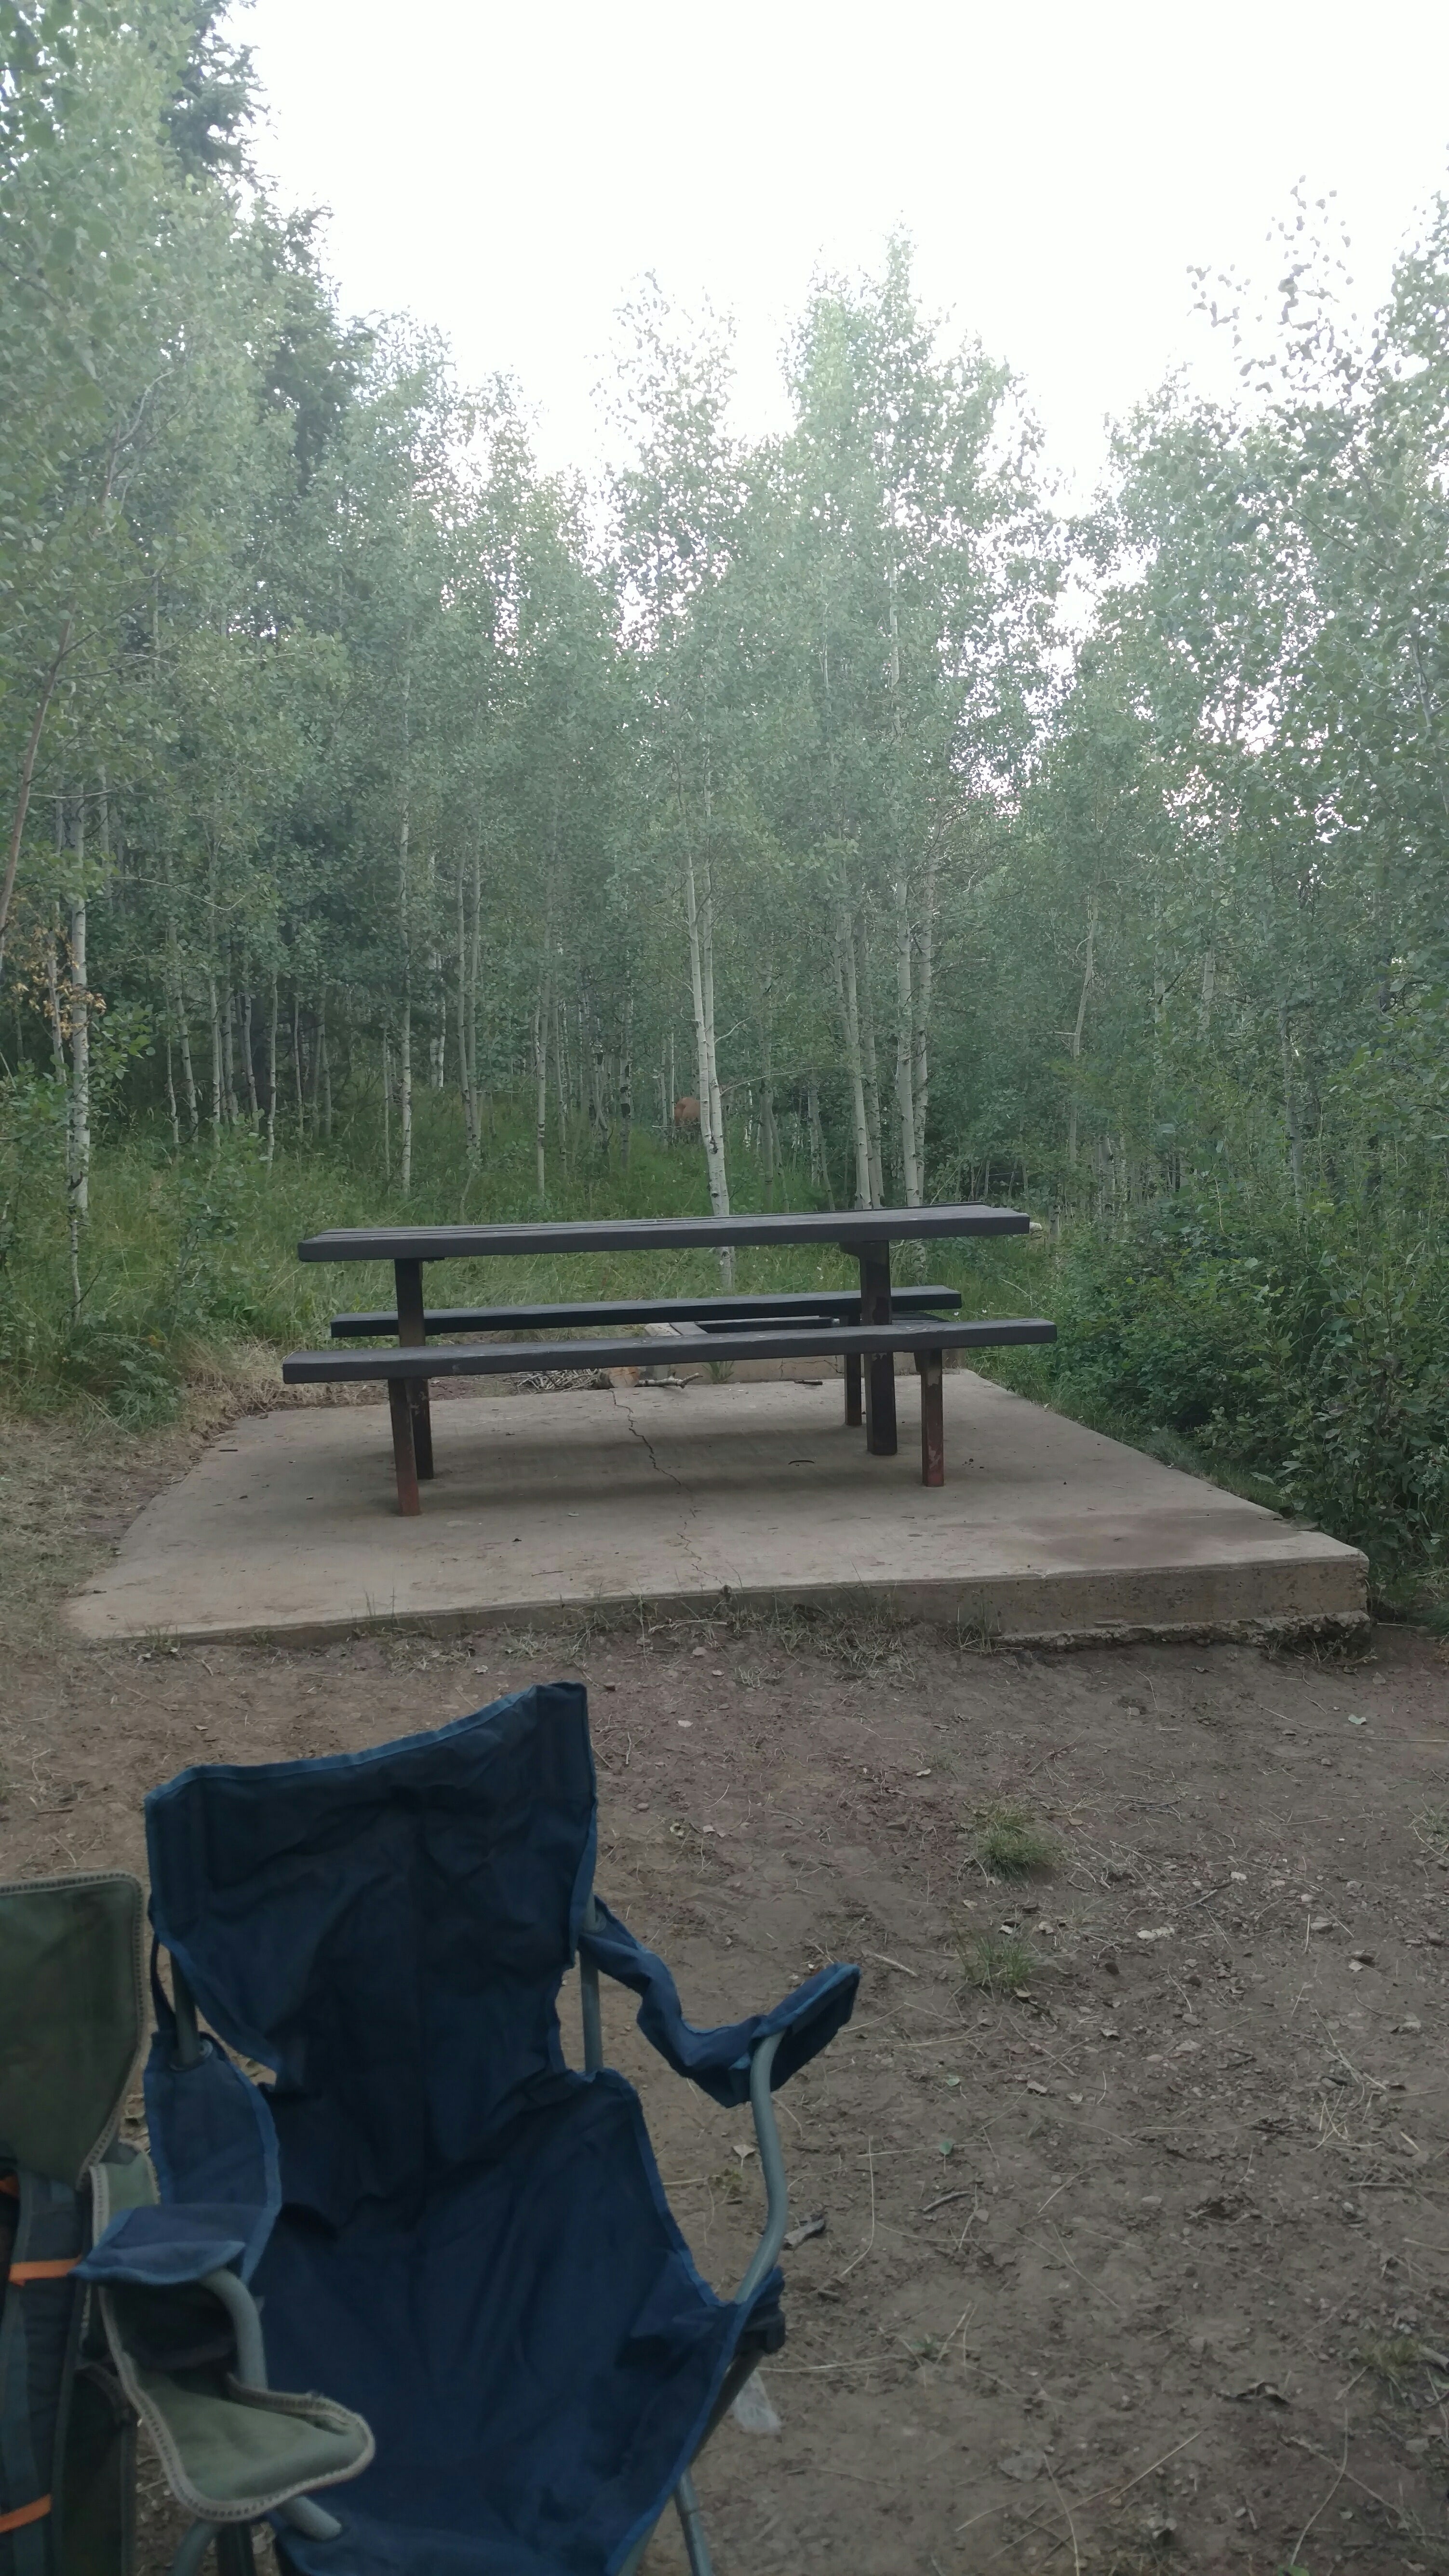 Camper submitted image from Aspen Grove (uinta-wasatch-cache National Forest, Ut) - 3